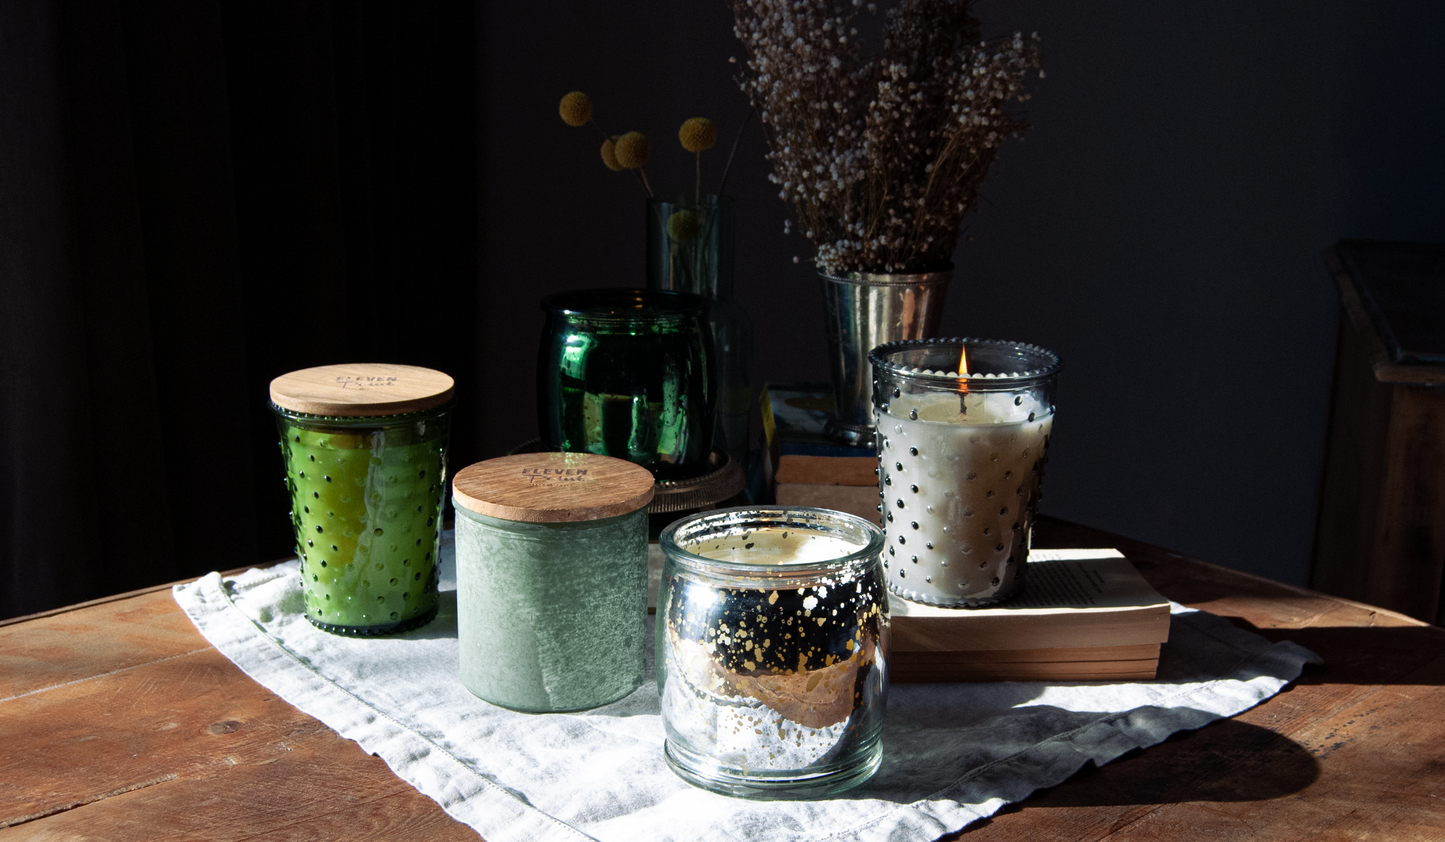 Skinny Dip Hobnail Candle in Verde Candle Eleven Point   